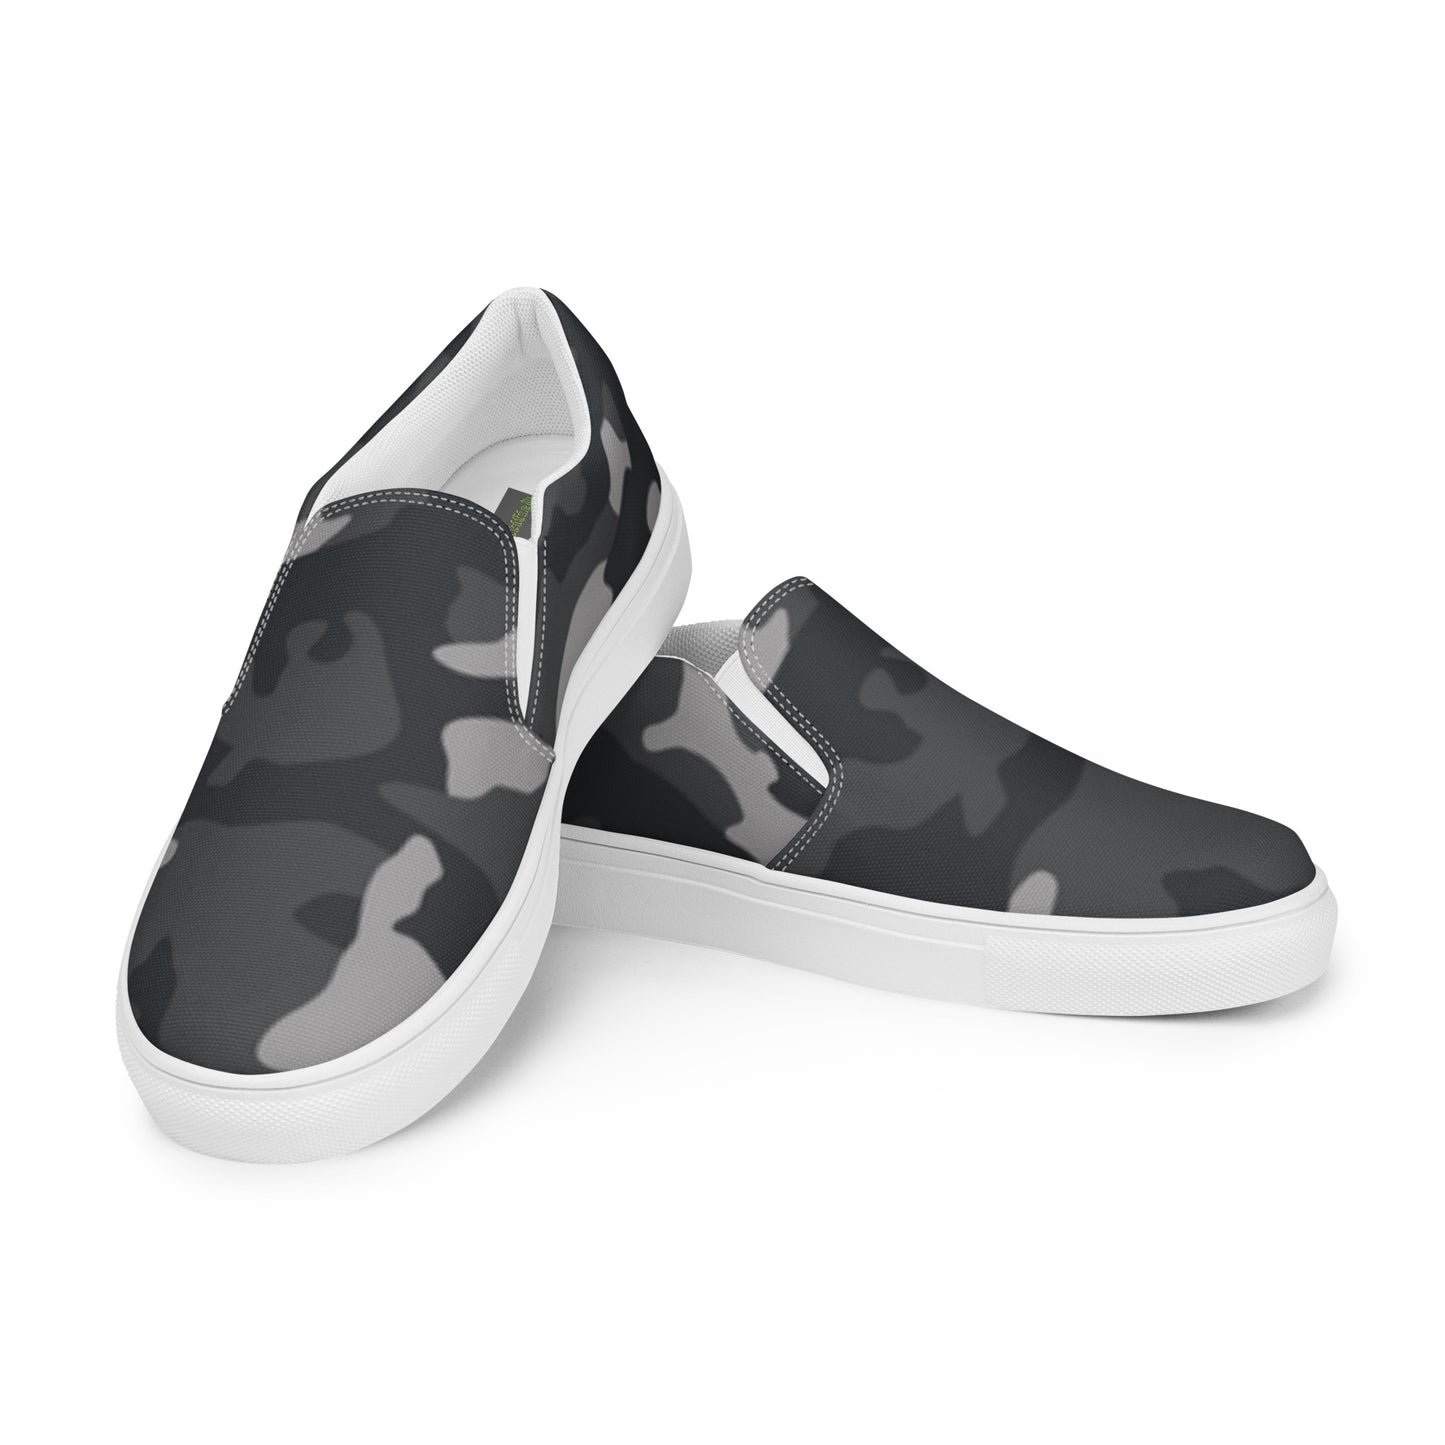 Men’s slip-on canvas shoes, Free Shipping